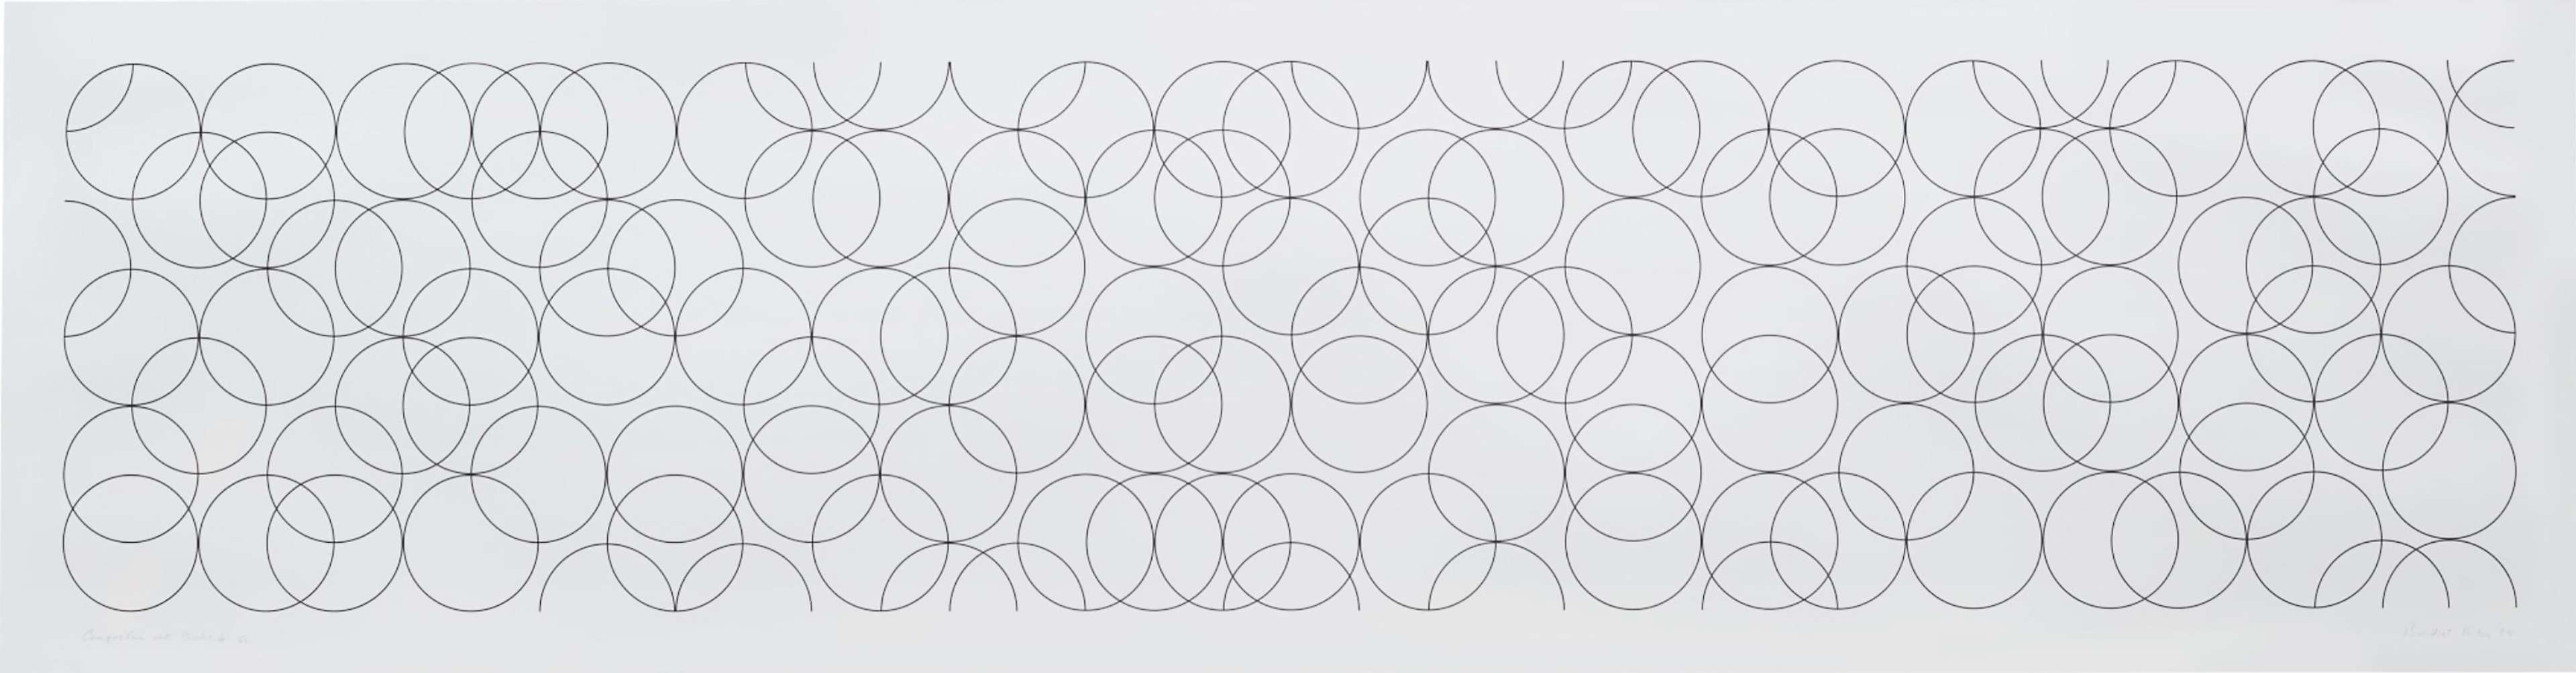 Composition With Circles 4 - Signed Print by Bridget Riley 2004 - MyArtBroker